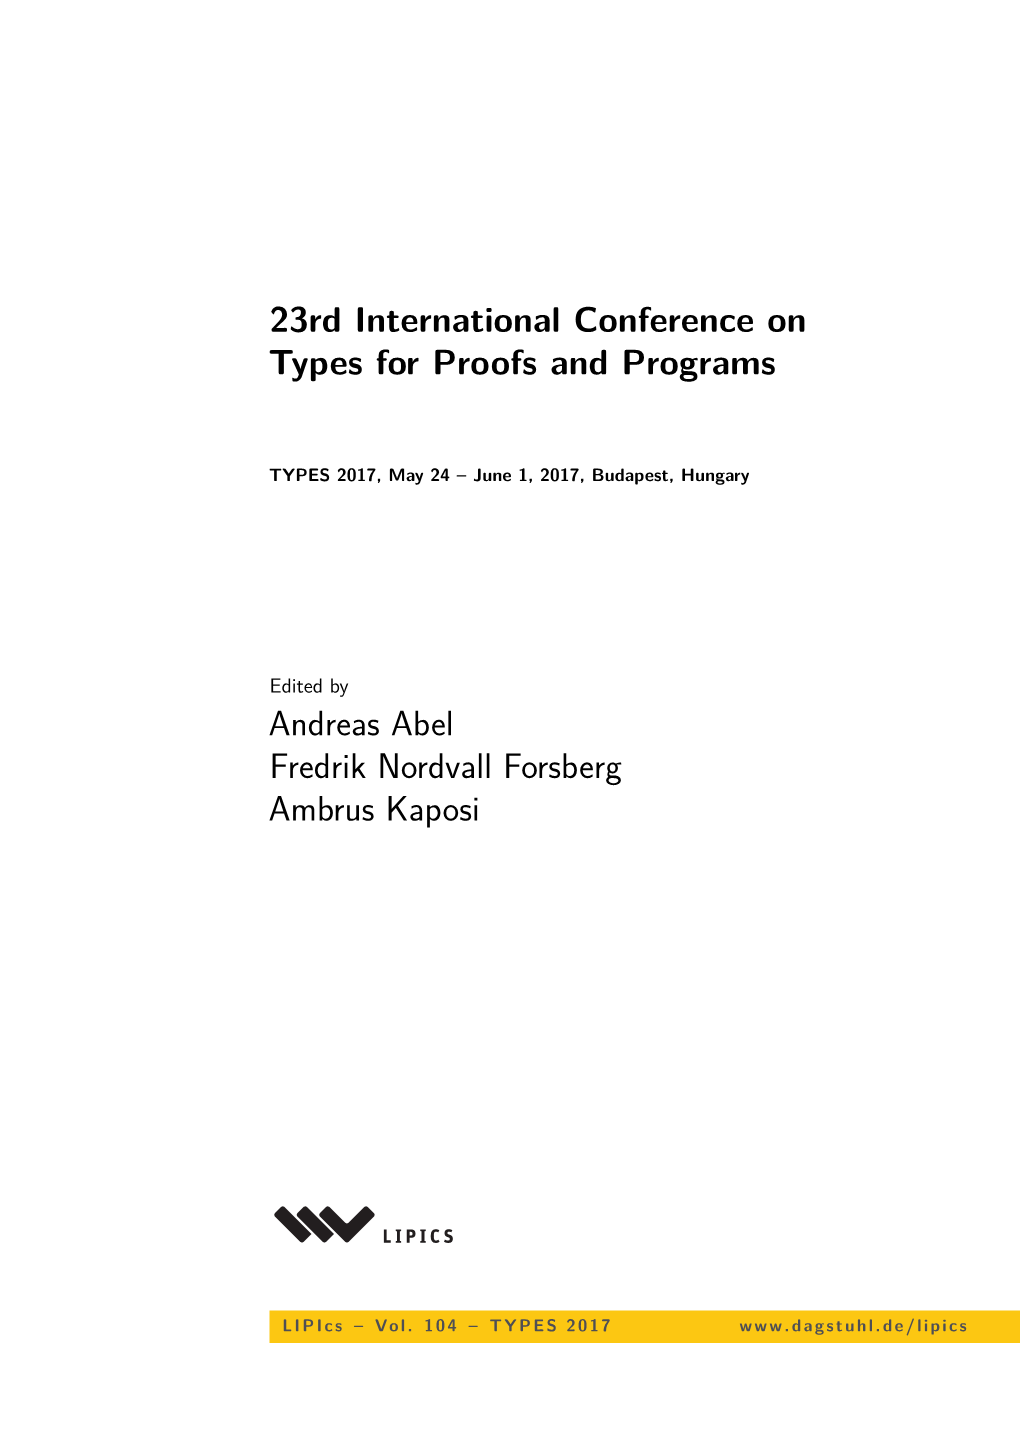 23Rd International Conference on Types for Proofs and Programs